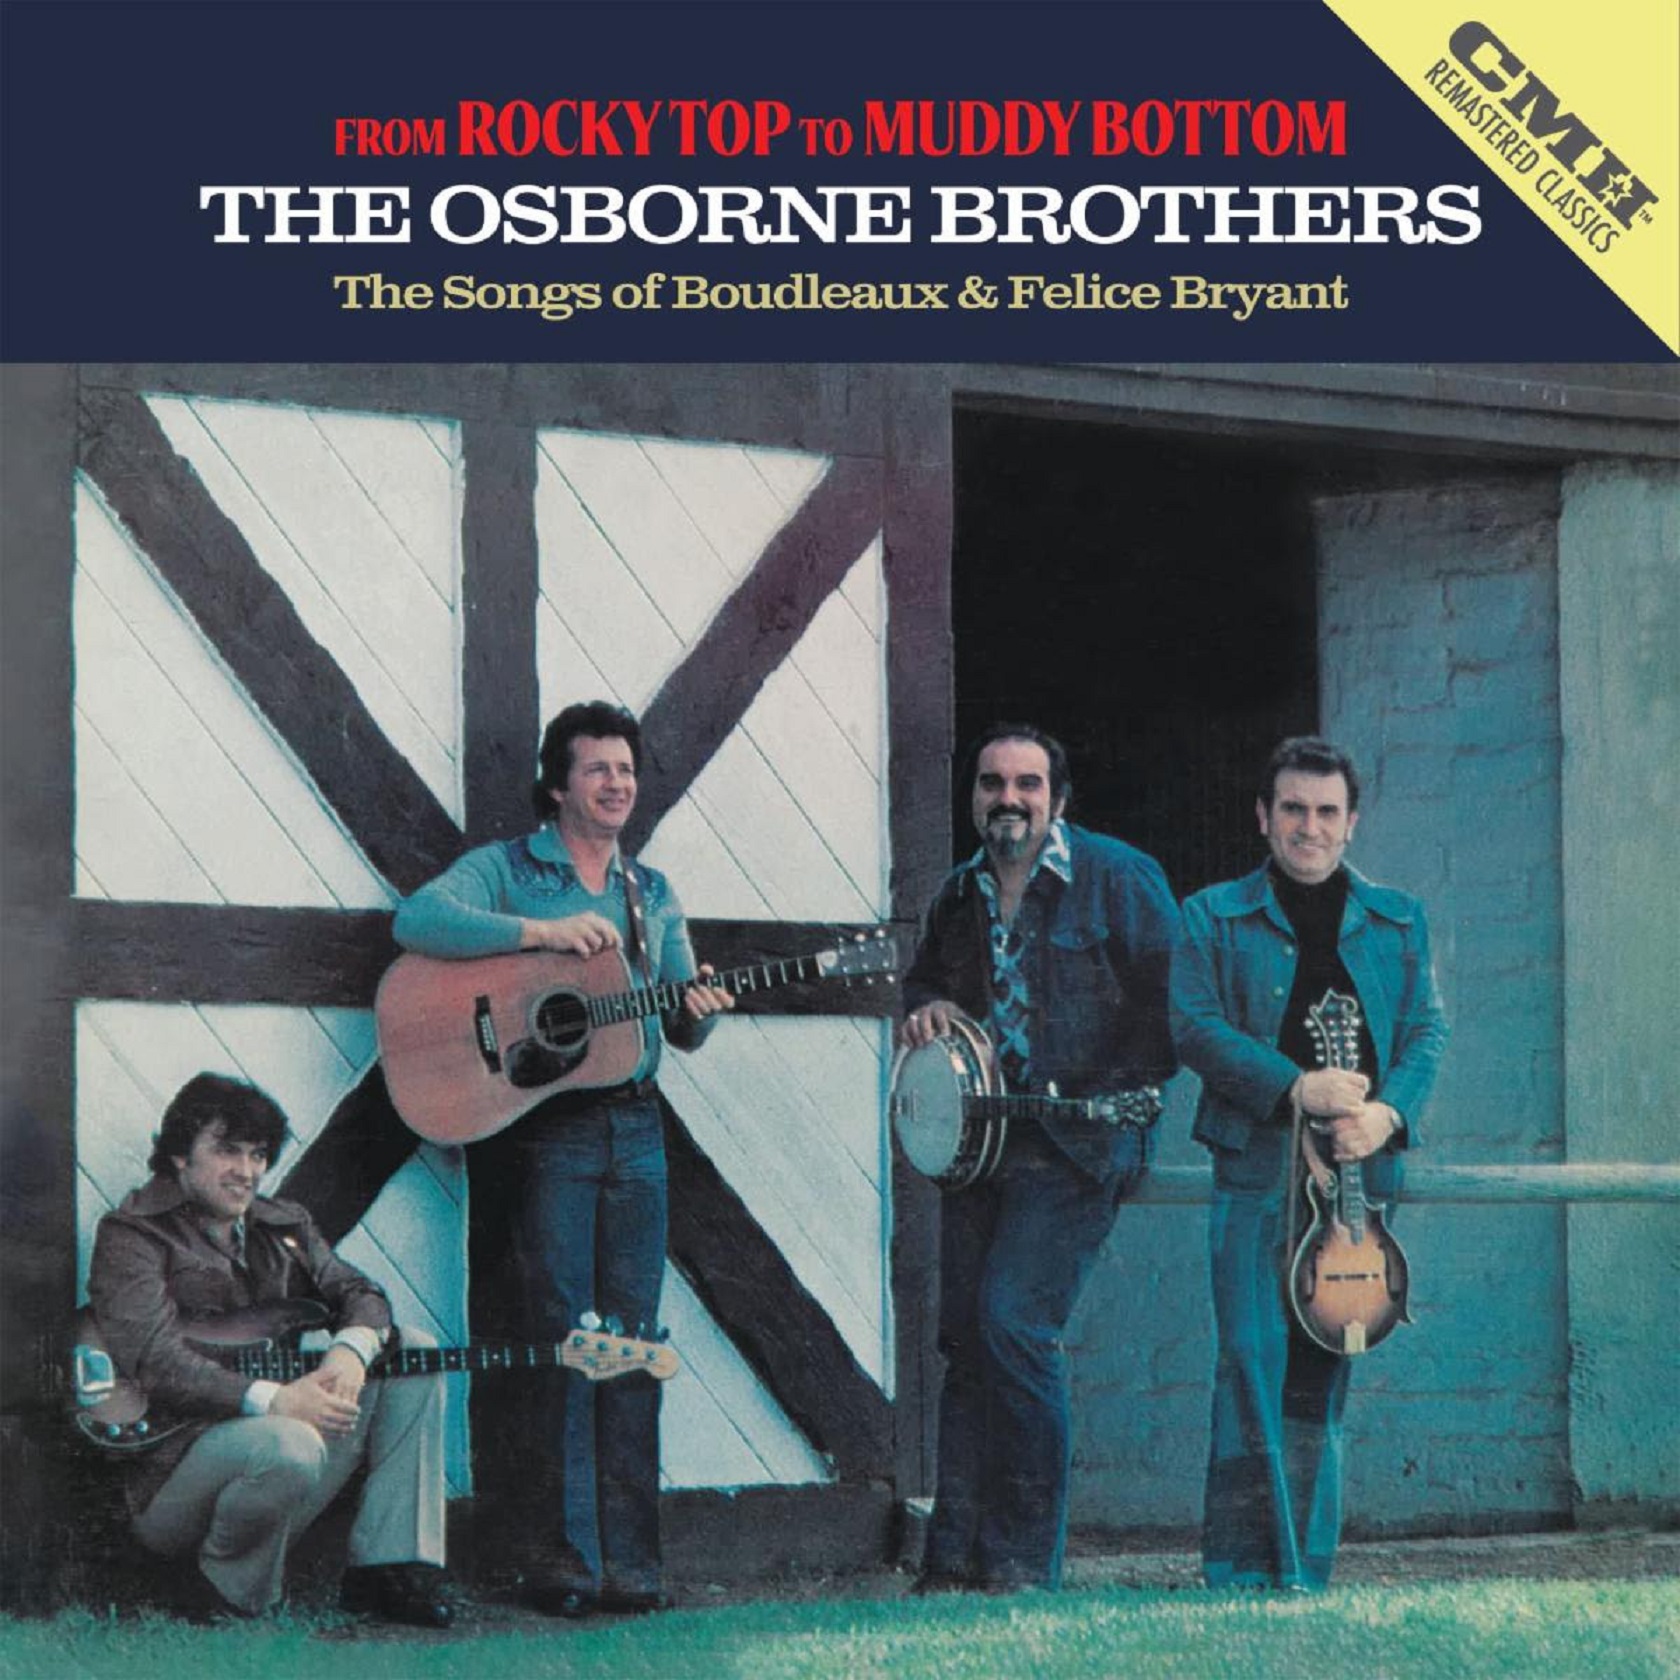 CMH Records Releases Long Out-Of-Print Album The Osborne Brothers’ 'From Rocky Top To Muddy Bottom'